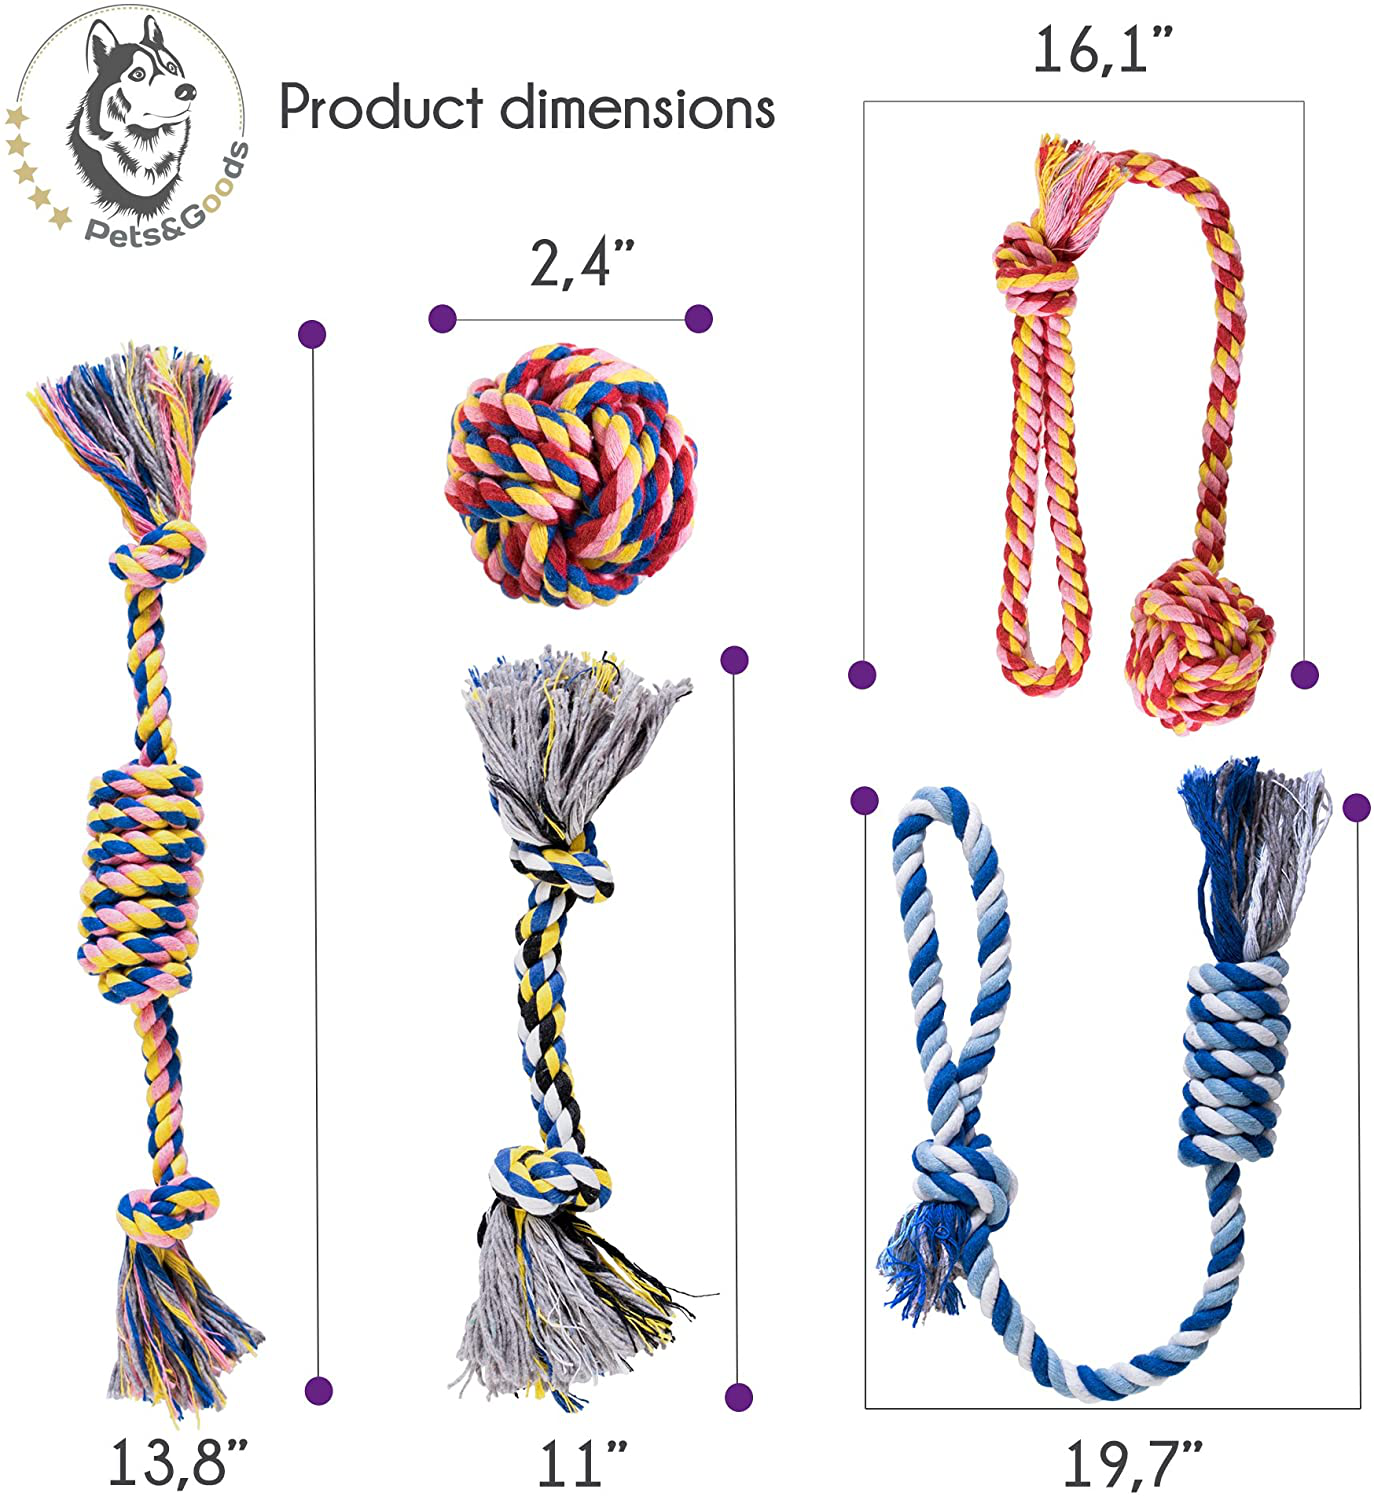 Dog Toys - Dog Chew Toys - Puppy Teething Toys- Puppy Chew Toys - Rope Dog Toy - Puppy Toys - Small Dog Toys - Chew Toys - Dog Toy Pack - Tug Toy - Dog Toy Set - Washable Cotton Rope for Dogs Animals & Pet Supplies > Pet Supplies > Dog Supplies > Dog Toys Pets&Goods   